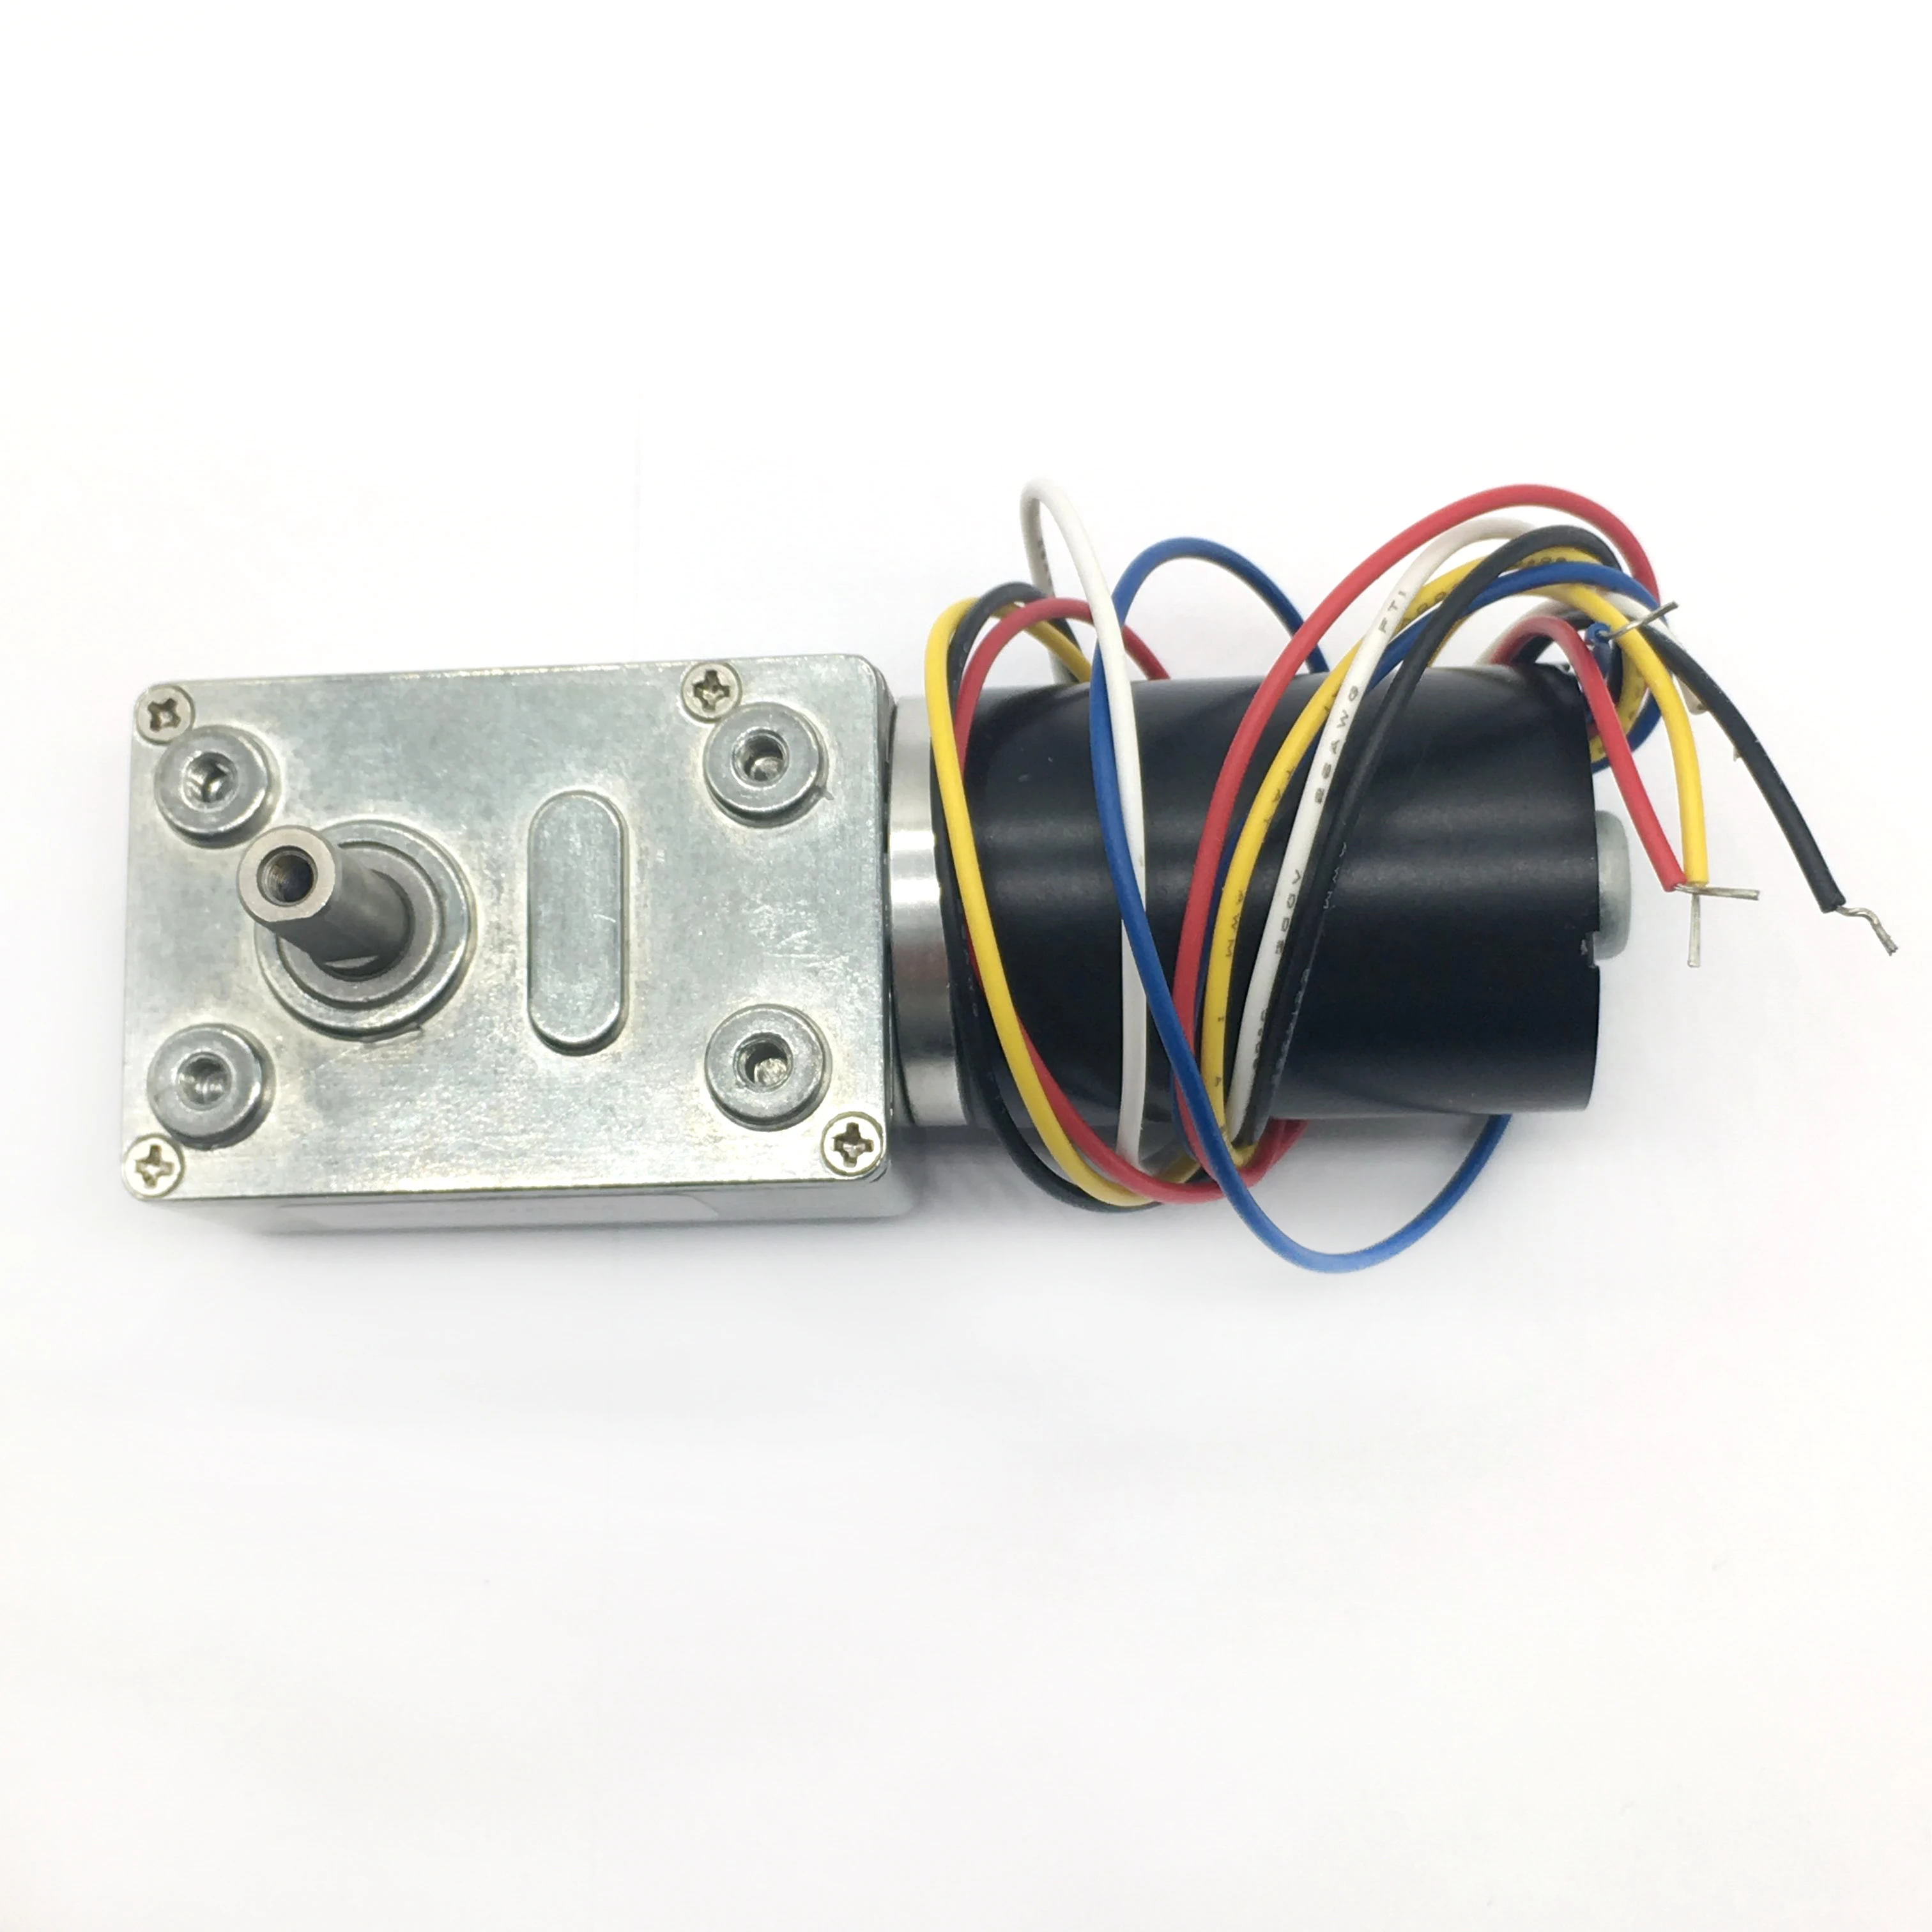 DC12V 2-160RPM JGY-2838 Brushless Turbo Worm Gear Motor with Self-locking CW/CCW 